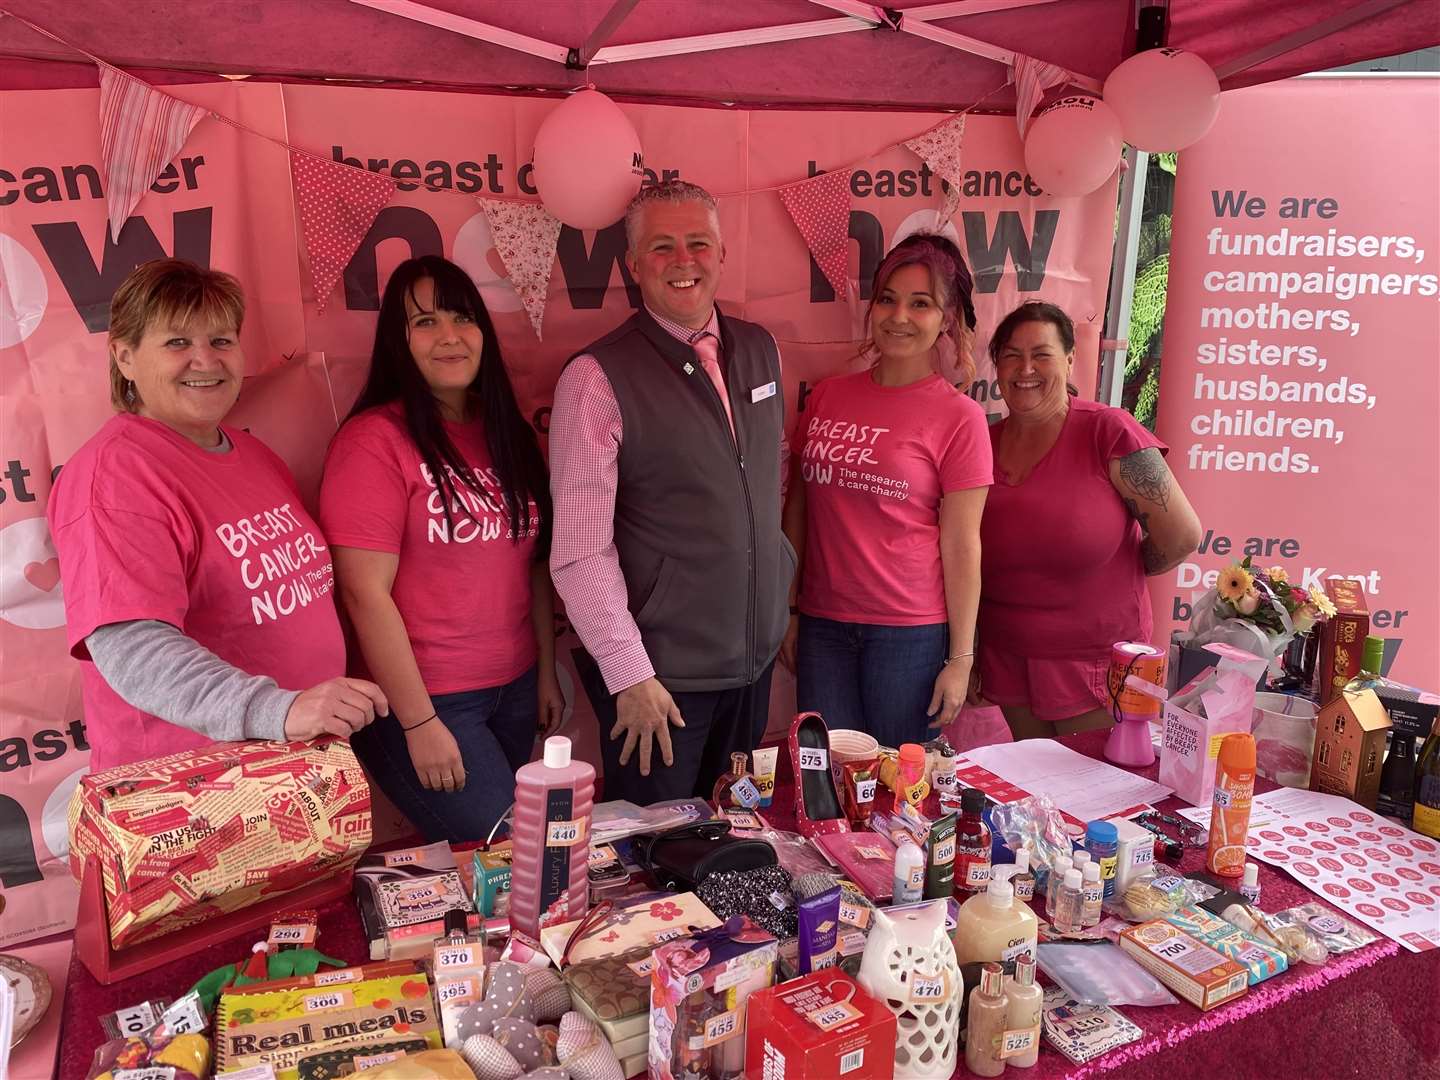 Kerry Banks supported Co-op manager James Bridger and his team to Wear It Pink raising £500